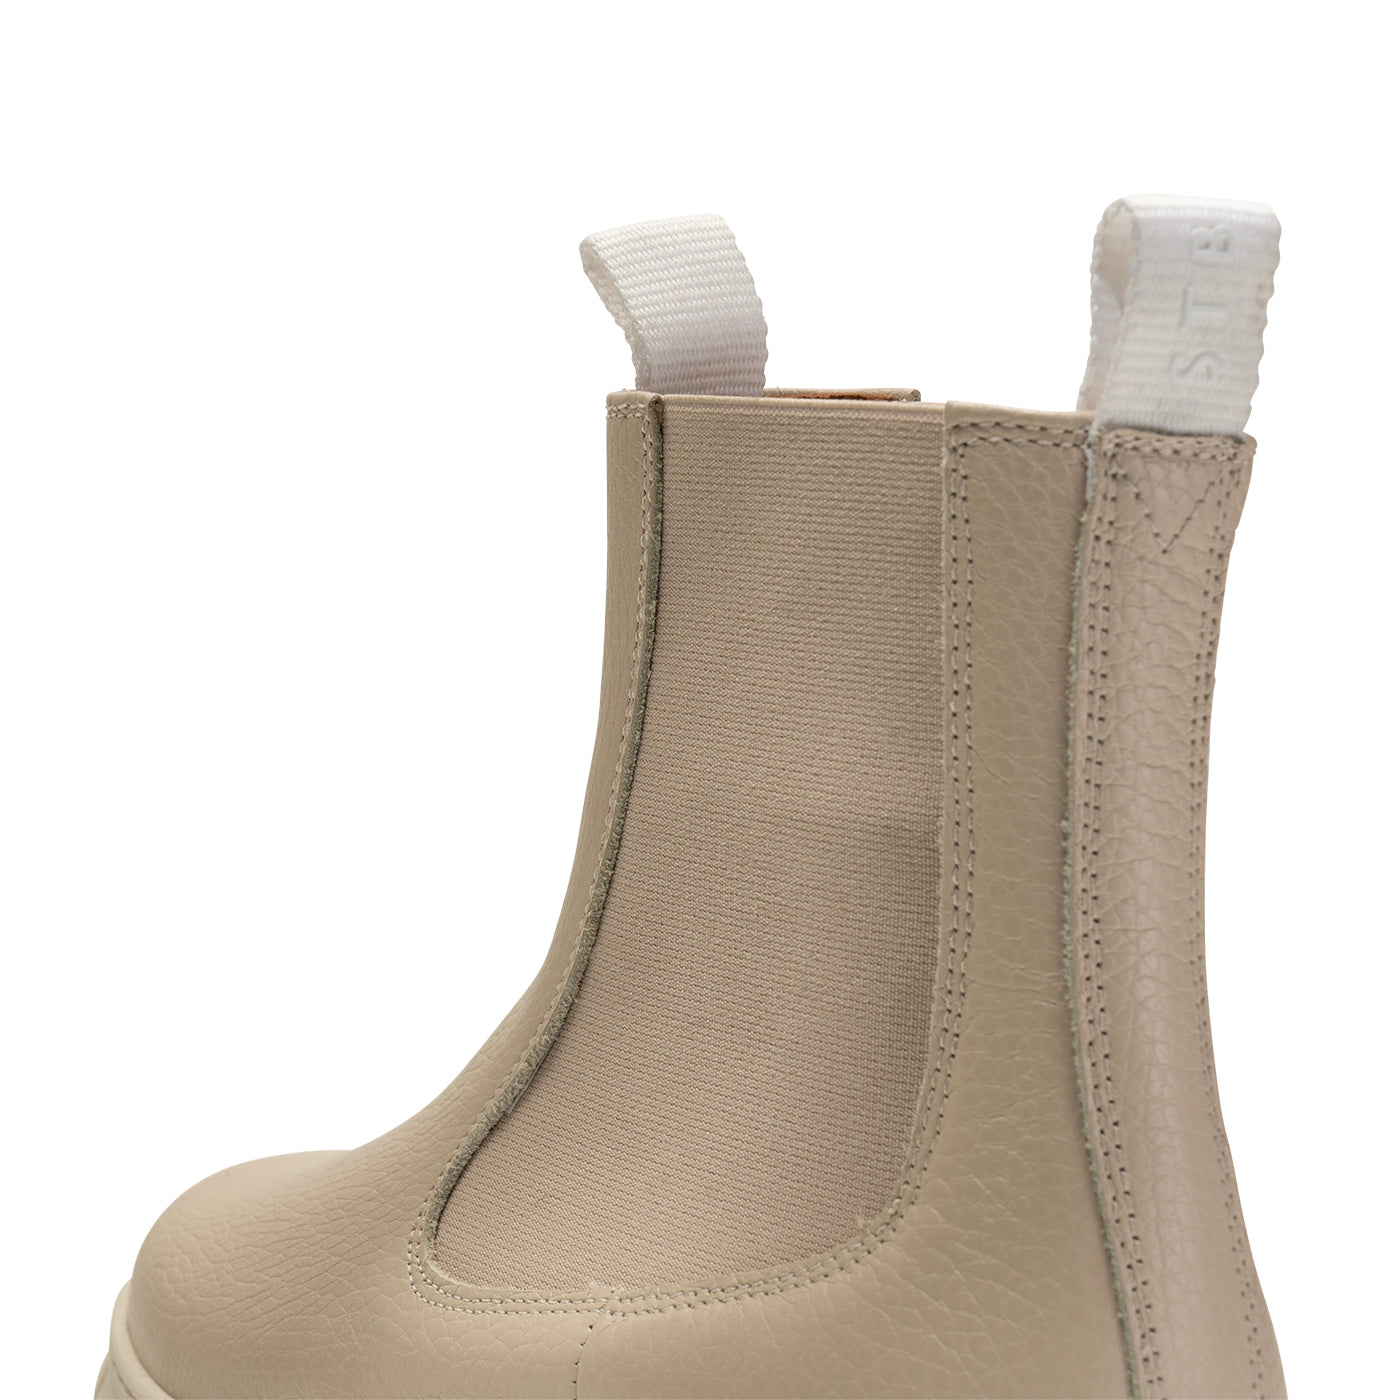 SHOE THE BEAR WOMENS Tove chelsea boot leather Chelsea Boots 127 OFF WHITE